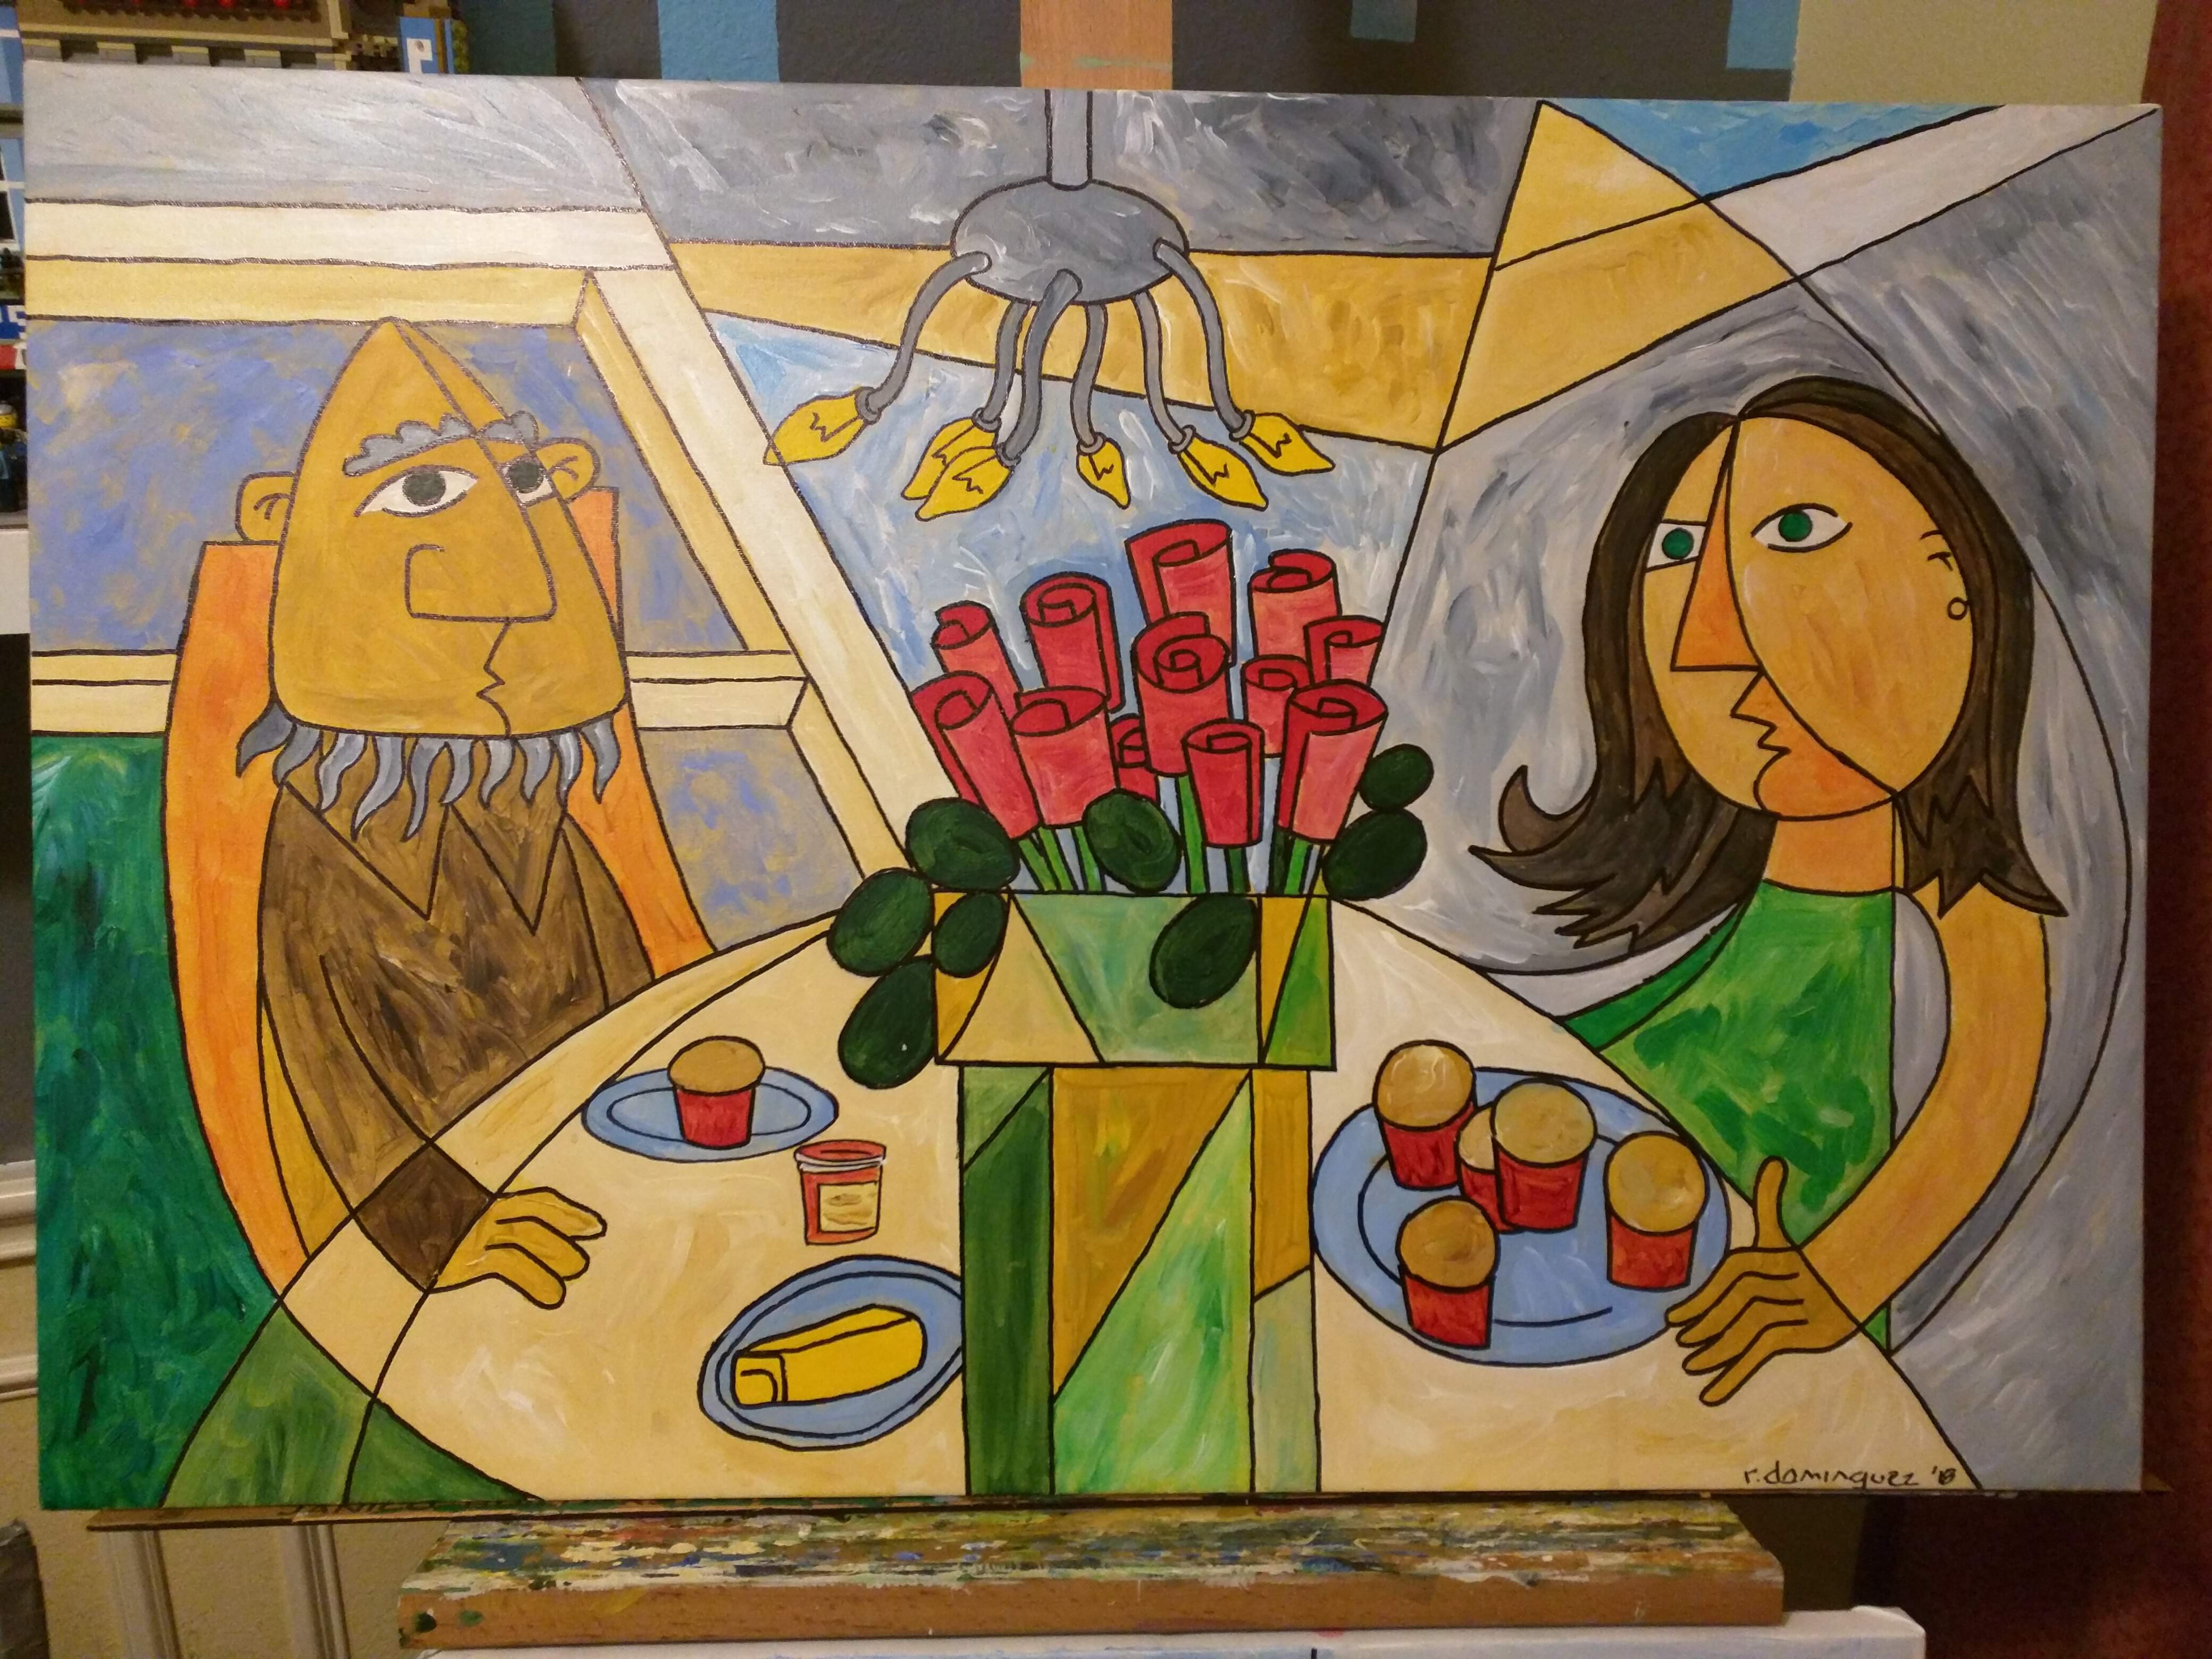 Painting of man and woman at table eating muffins.